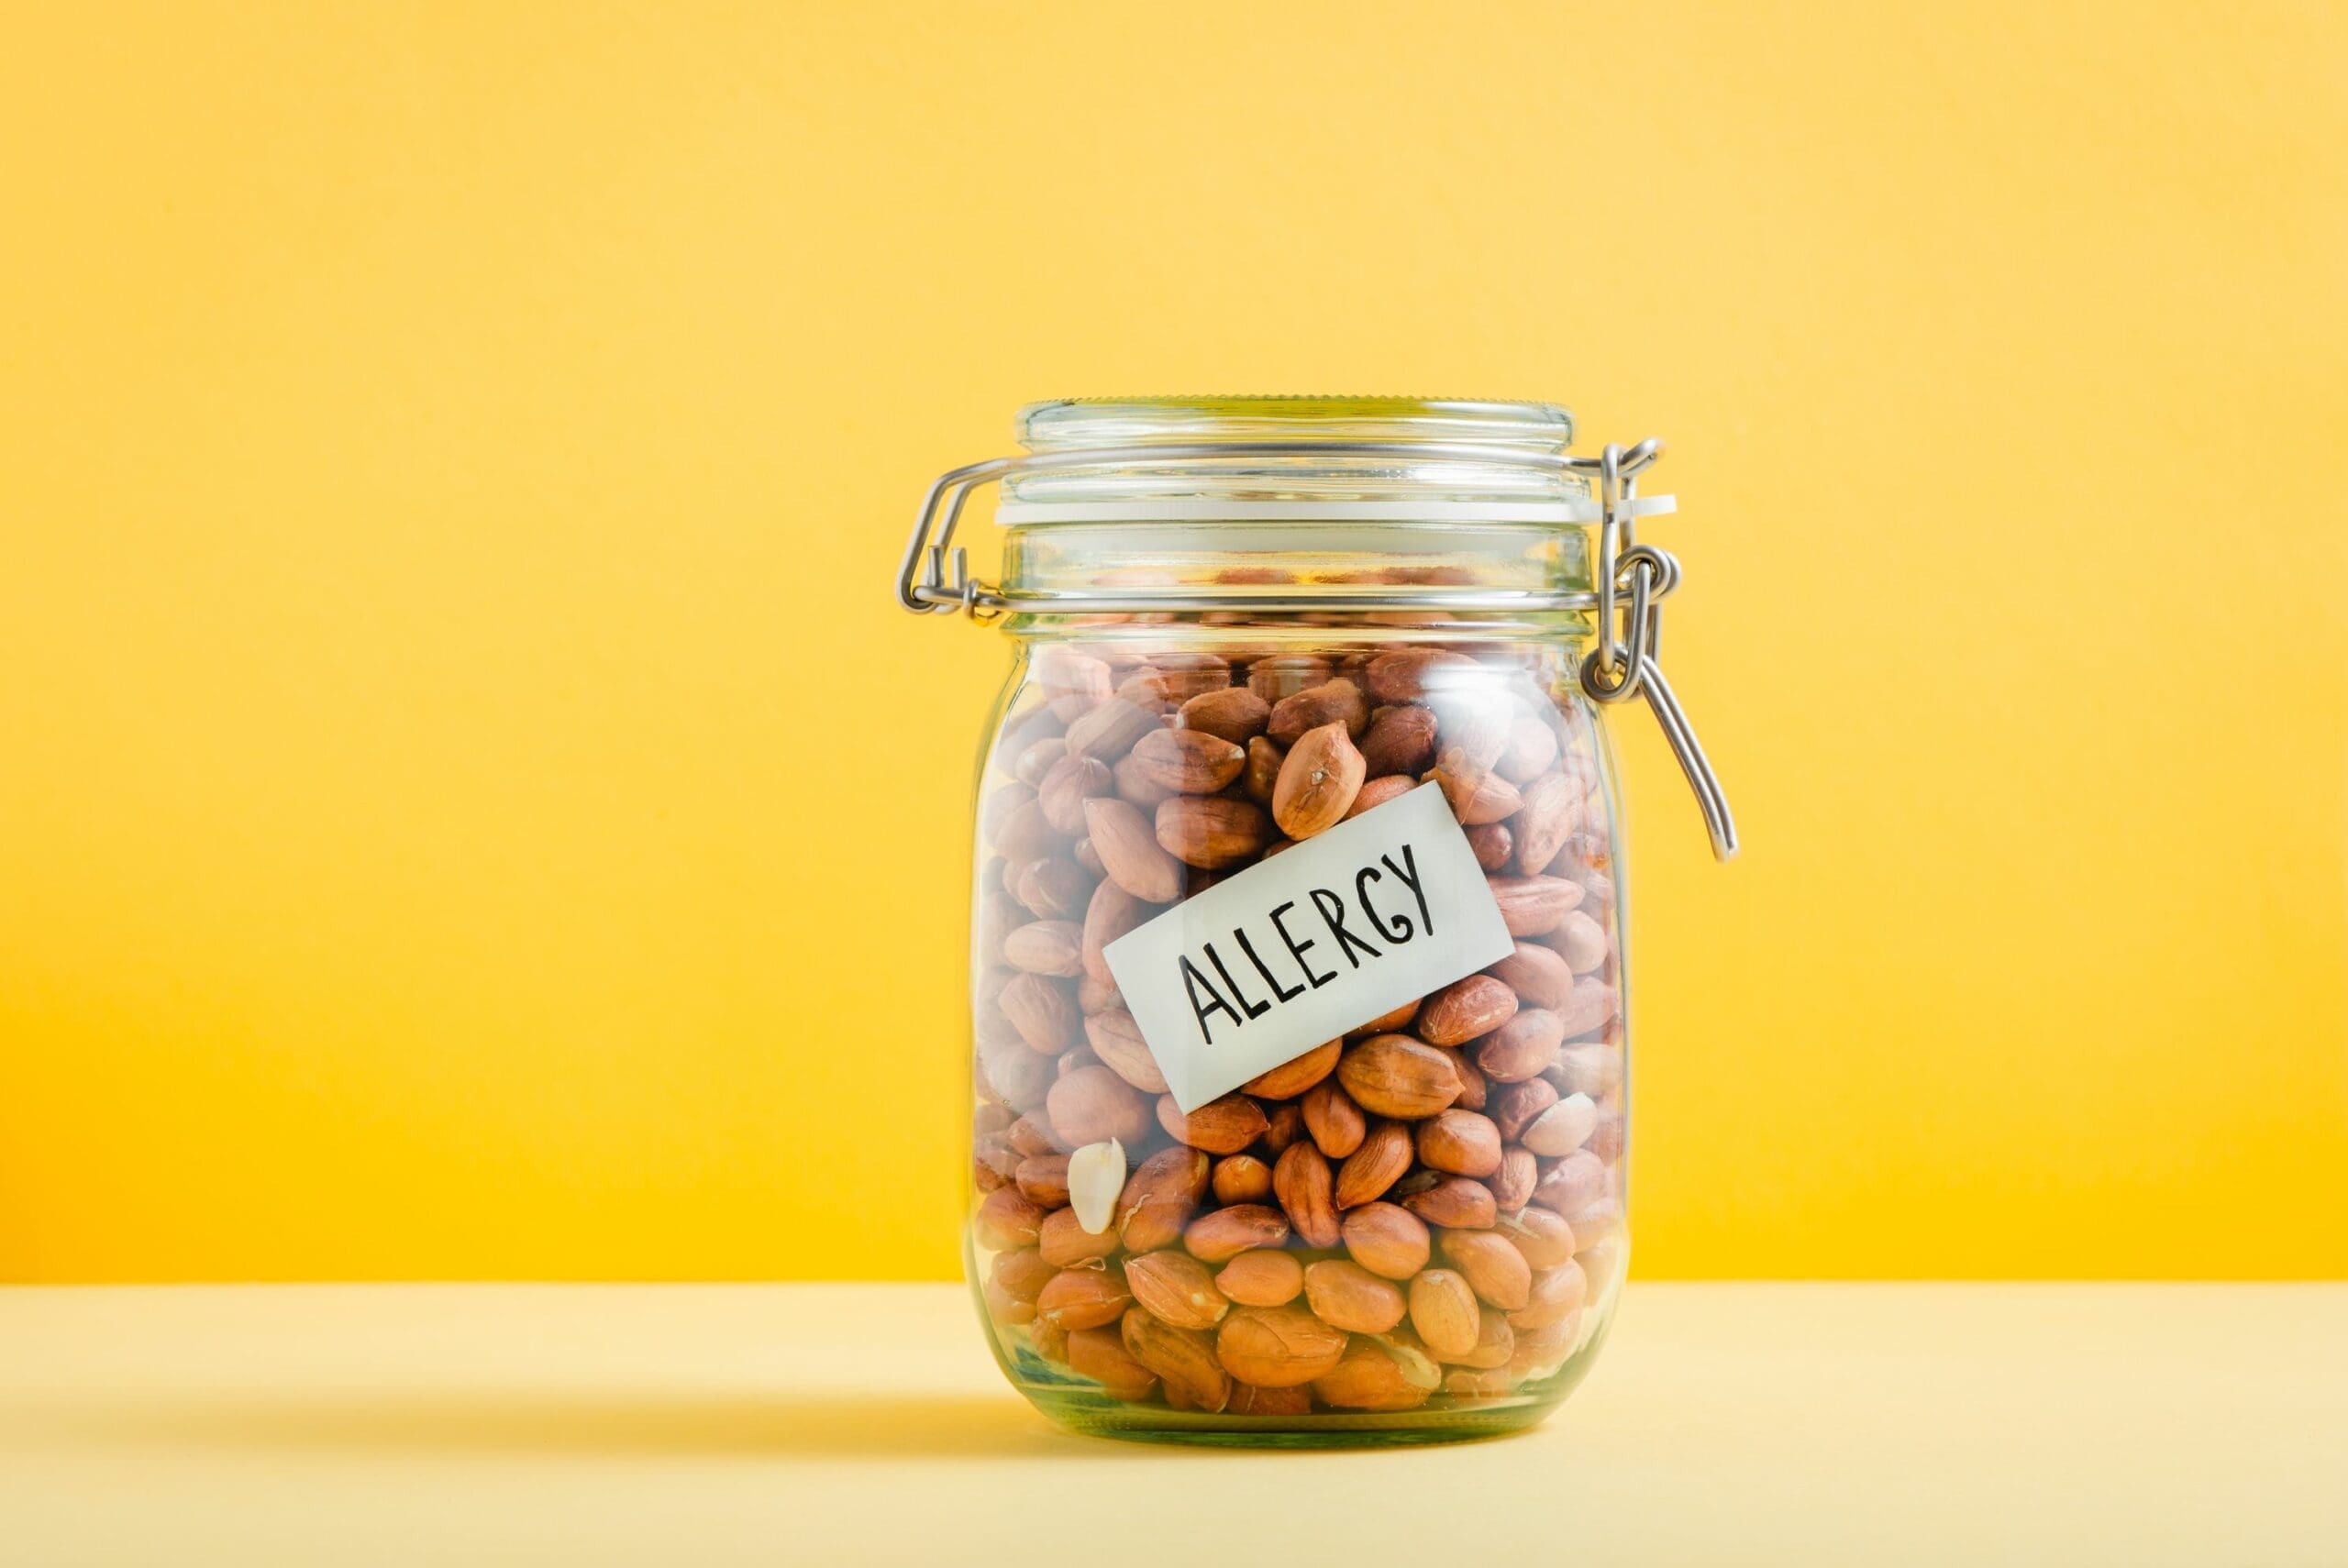 Treatment for peanut allergy can work when started early